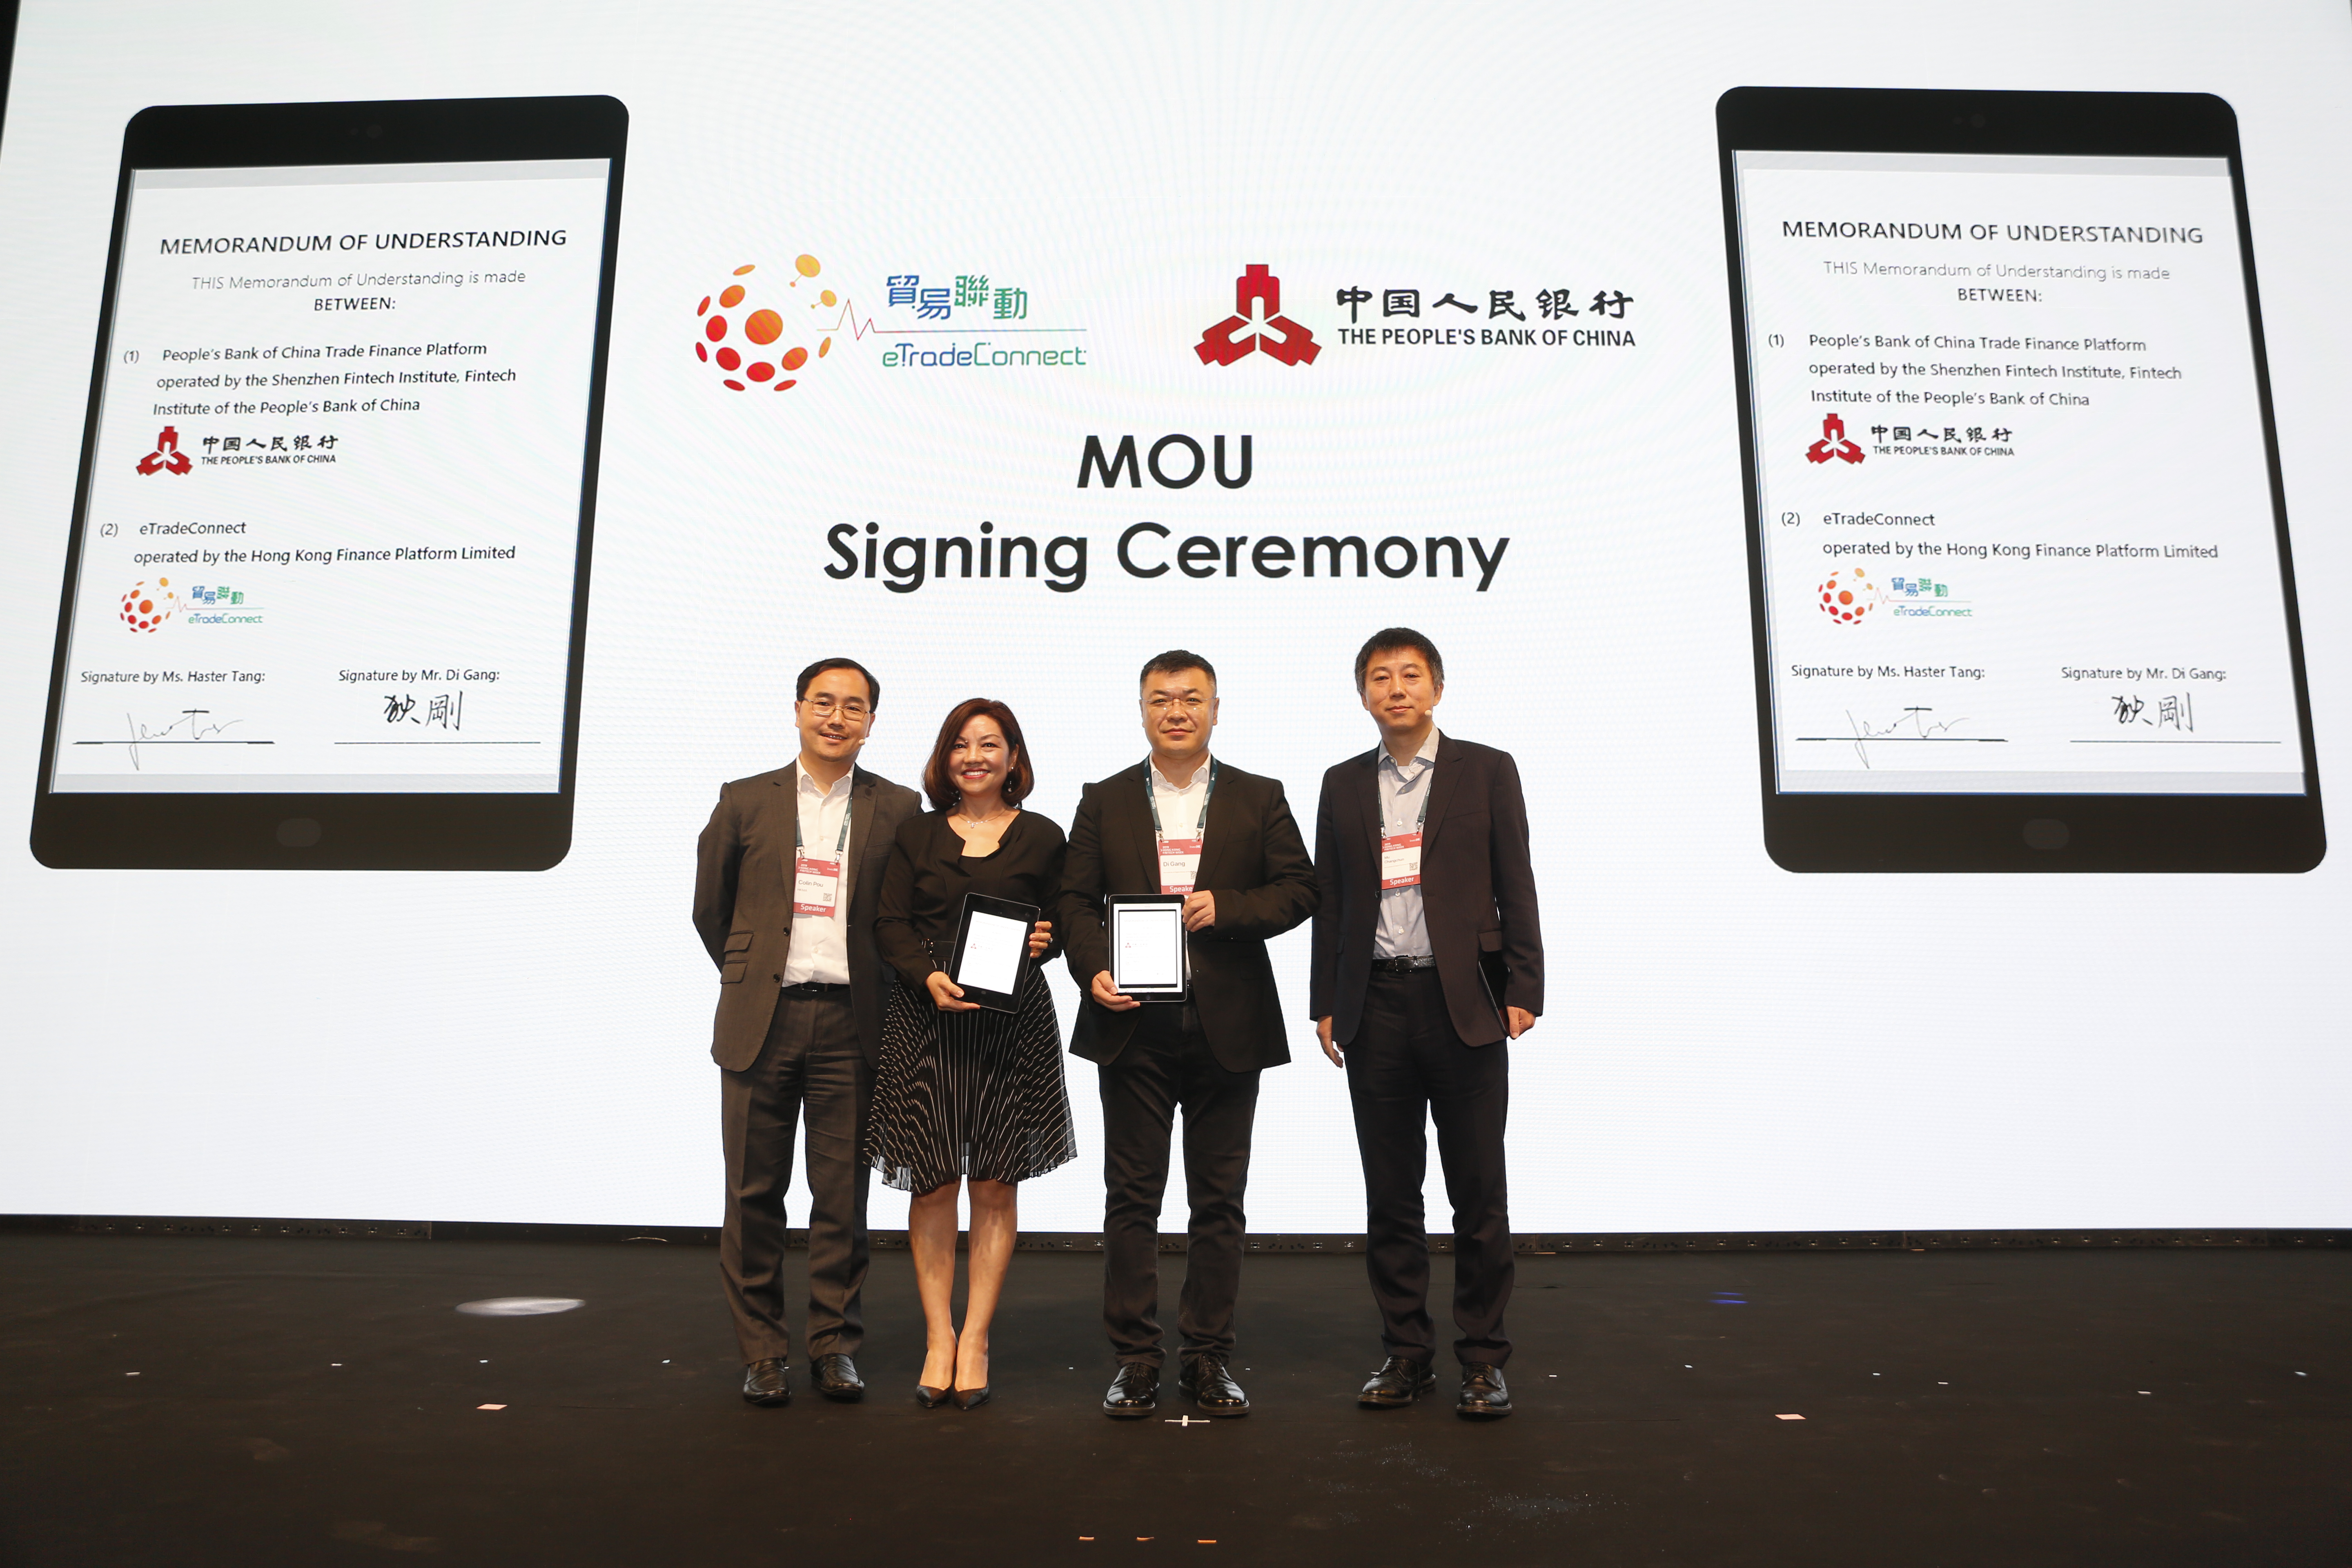 Ms Haster Tang, Chief Executive Officer of the Hong Kong Trade Finance Platform Company Limited (second from left), and Mr Di Gang, Deputy Director-General of the Institute of Digital Currency of the People’s Bank of China and Director of Shenzhen Fintech Institute (second from right), sign the Memorandum of Understanding to conduct a Proof-of-Concept trial. The signing ceremony is witnessed by Mr Colin Pou, Executive Director (Financial Infrastructure) of the HKMA (first from left), and Mr Mu Changchun, Director-General of the Institute of Digital Currency of the People’s Bank of China (first from right).